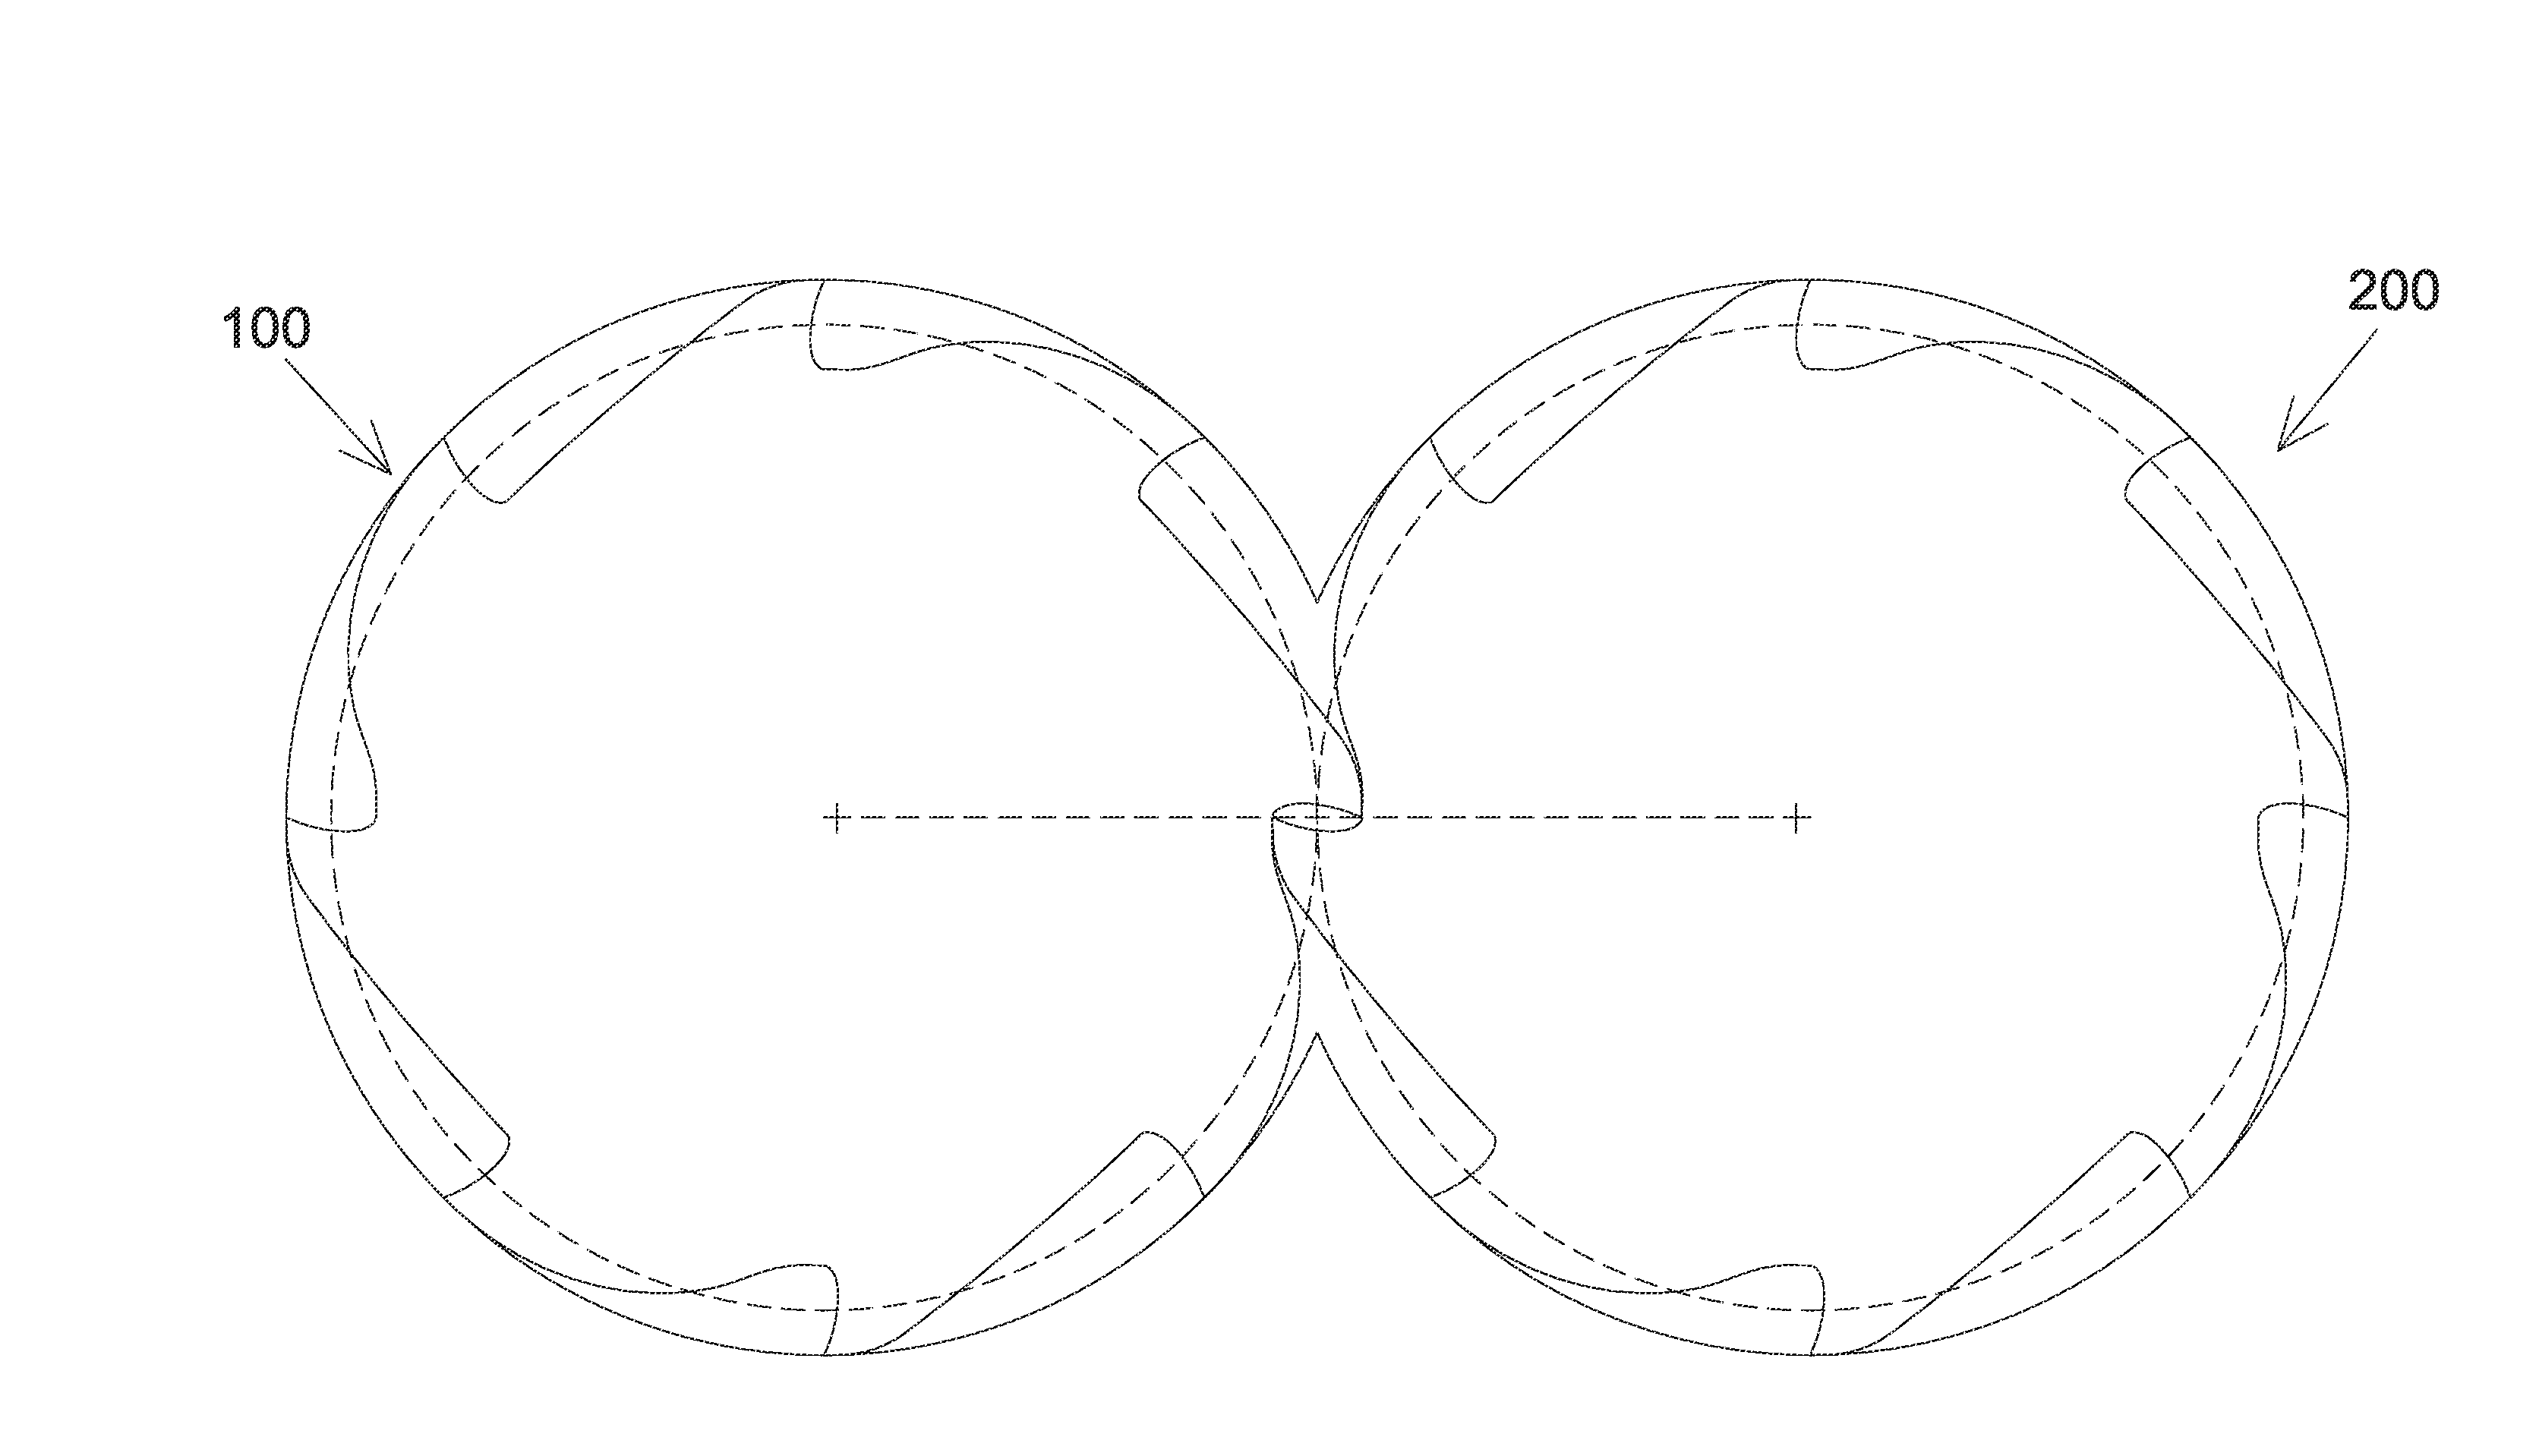 Device of a Pair of Claw-Type Rotors Having Same Profiles